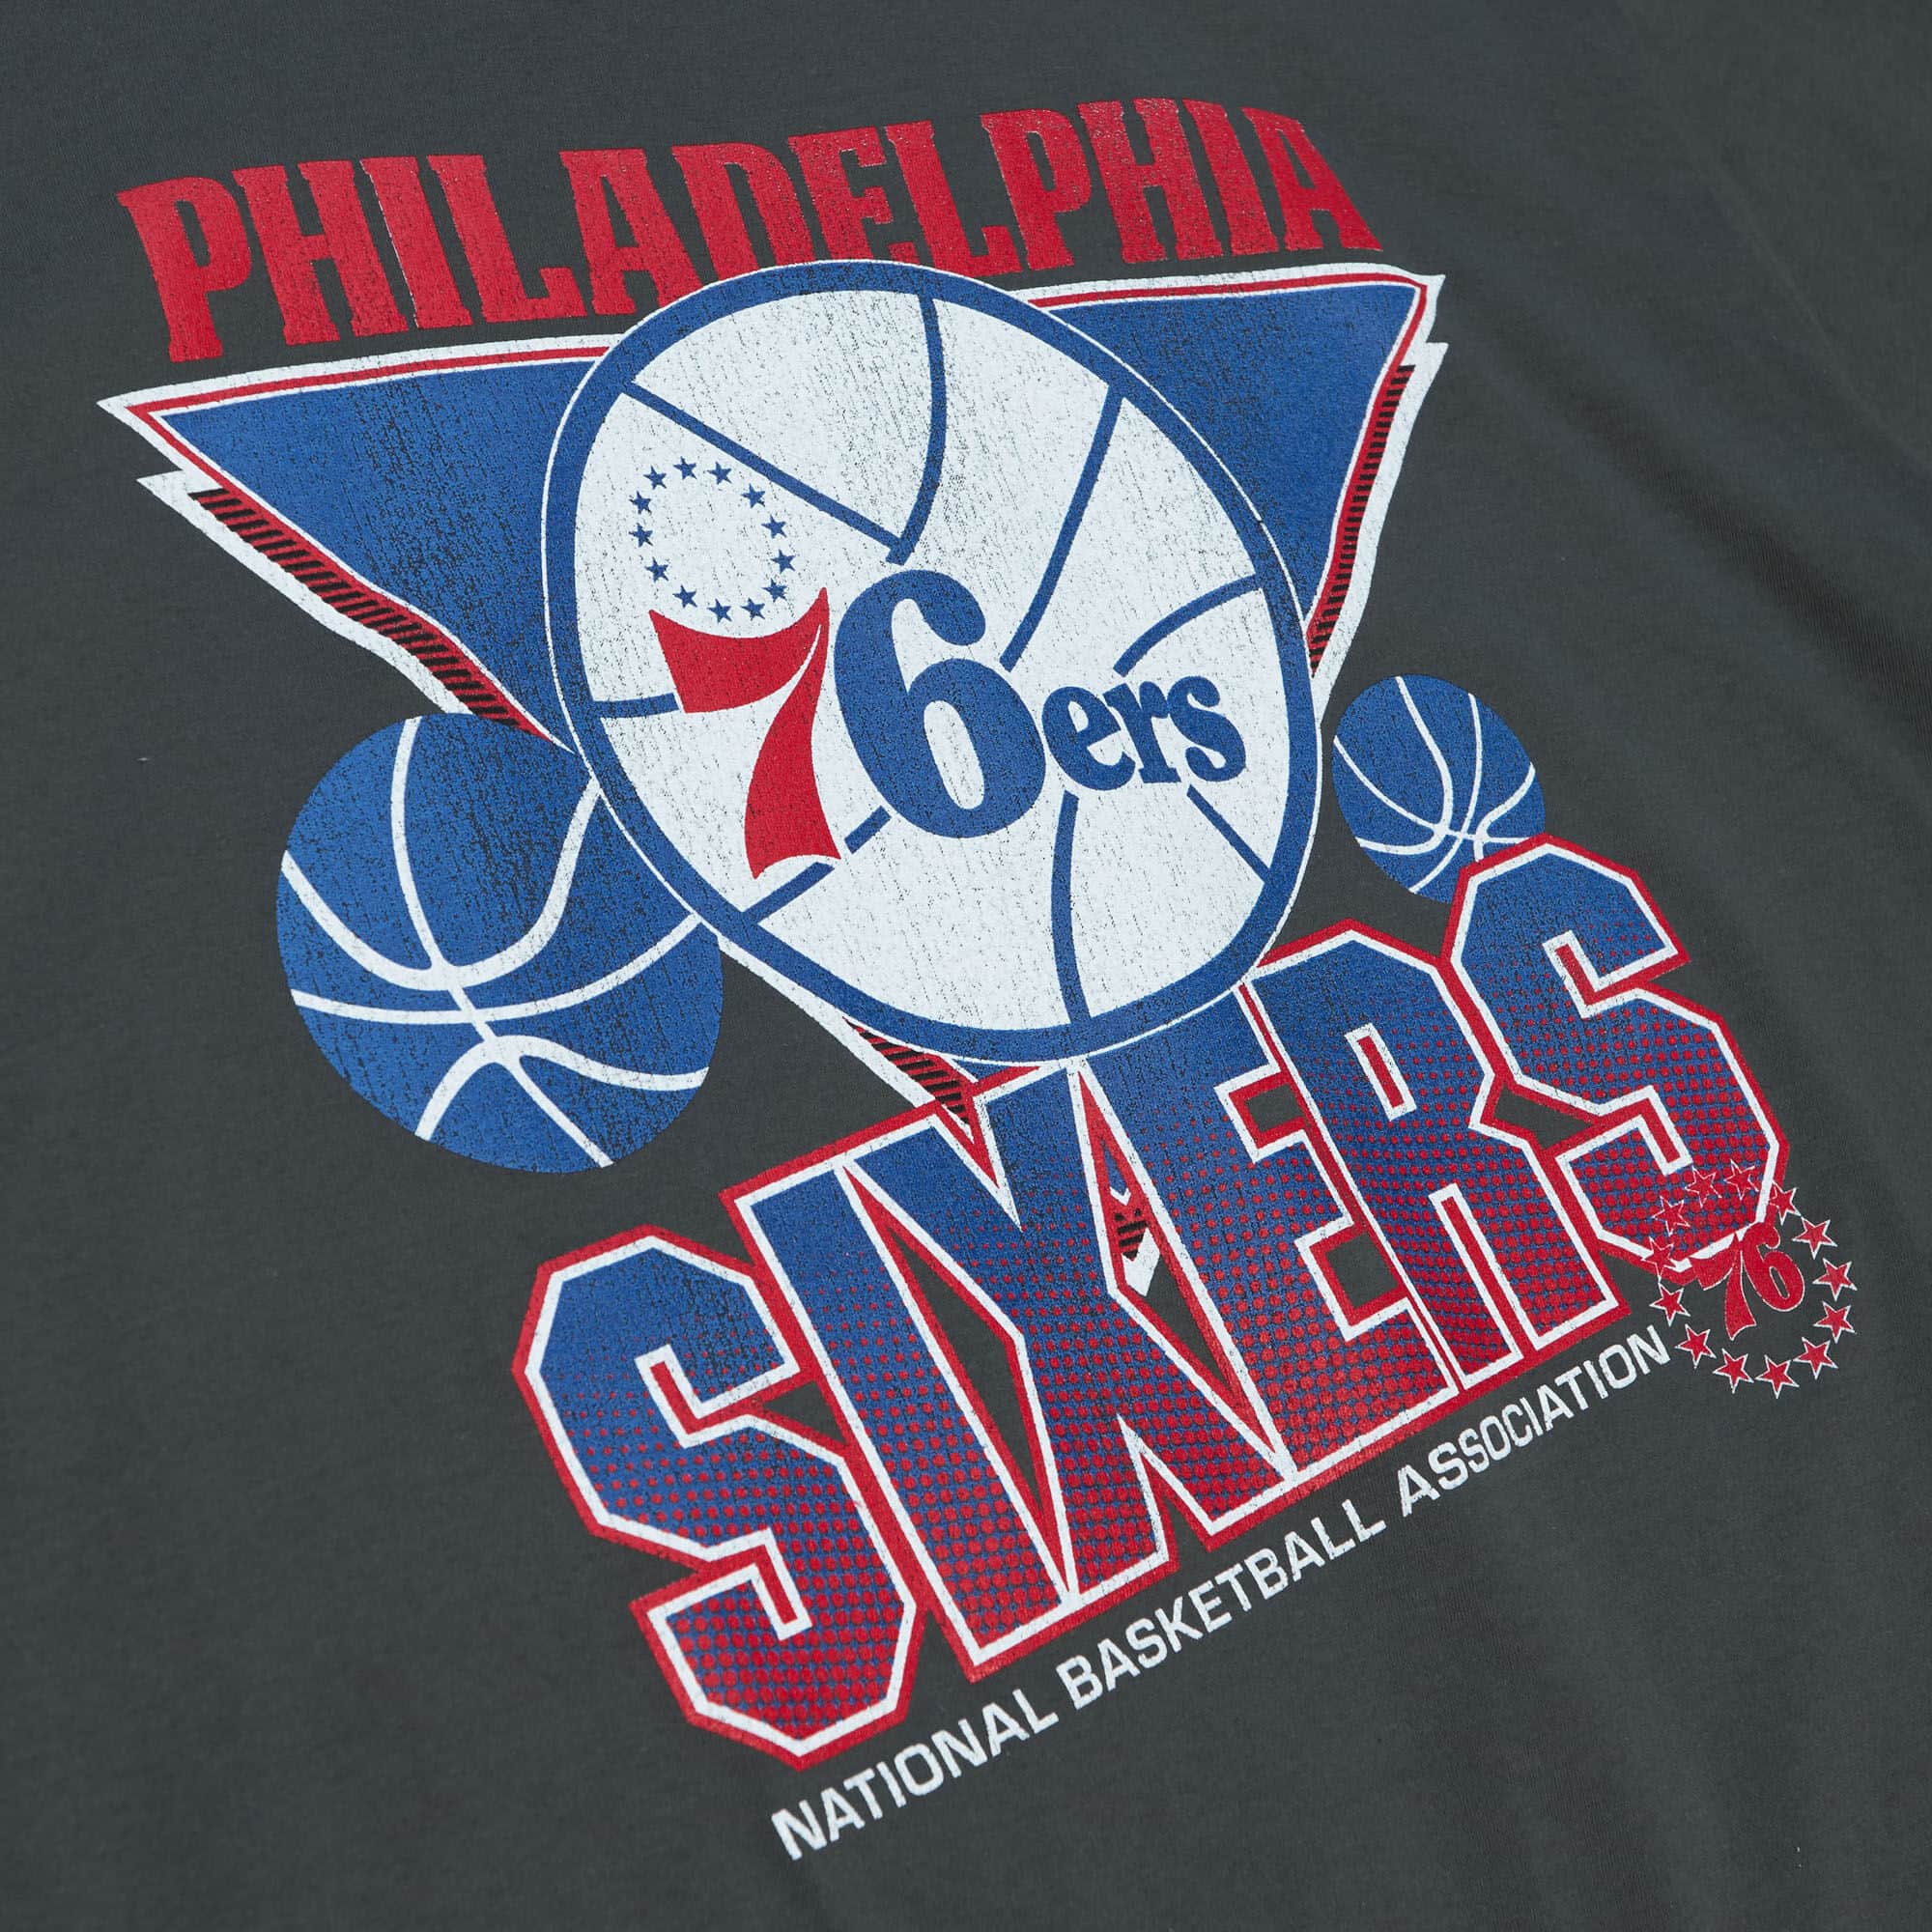 Philadelphia 76ers Ball is Back T-Shirt, Where to get the gear